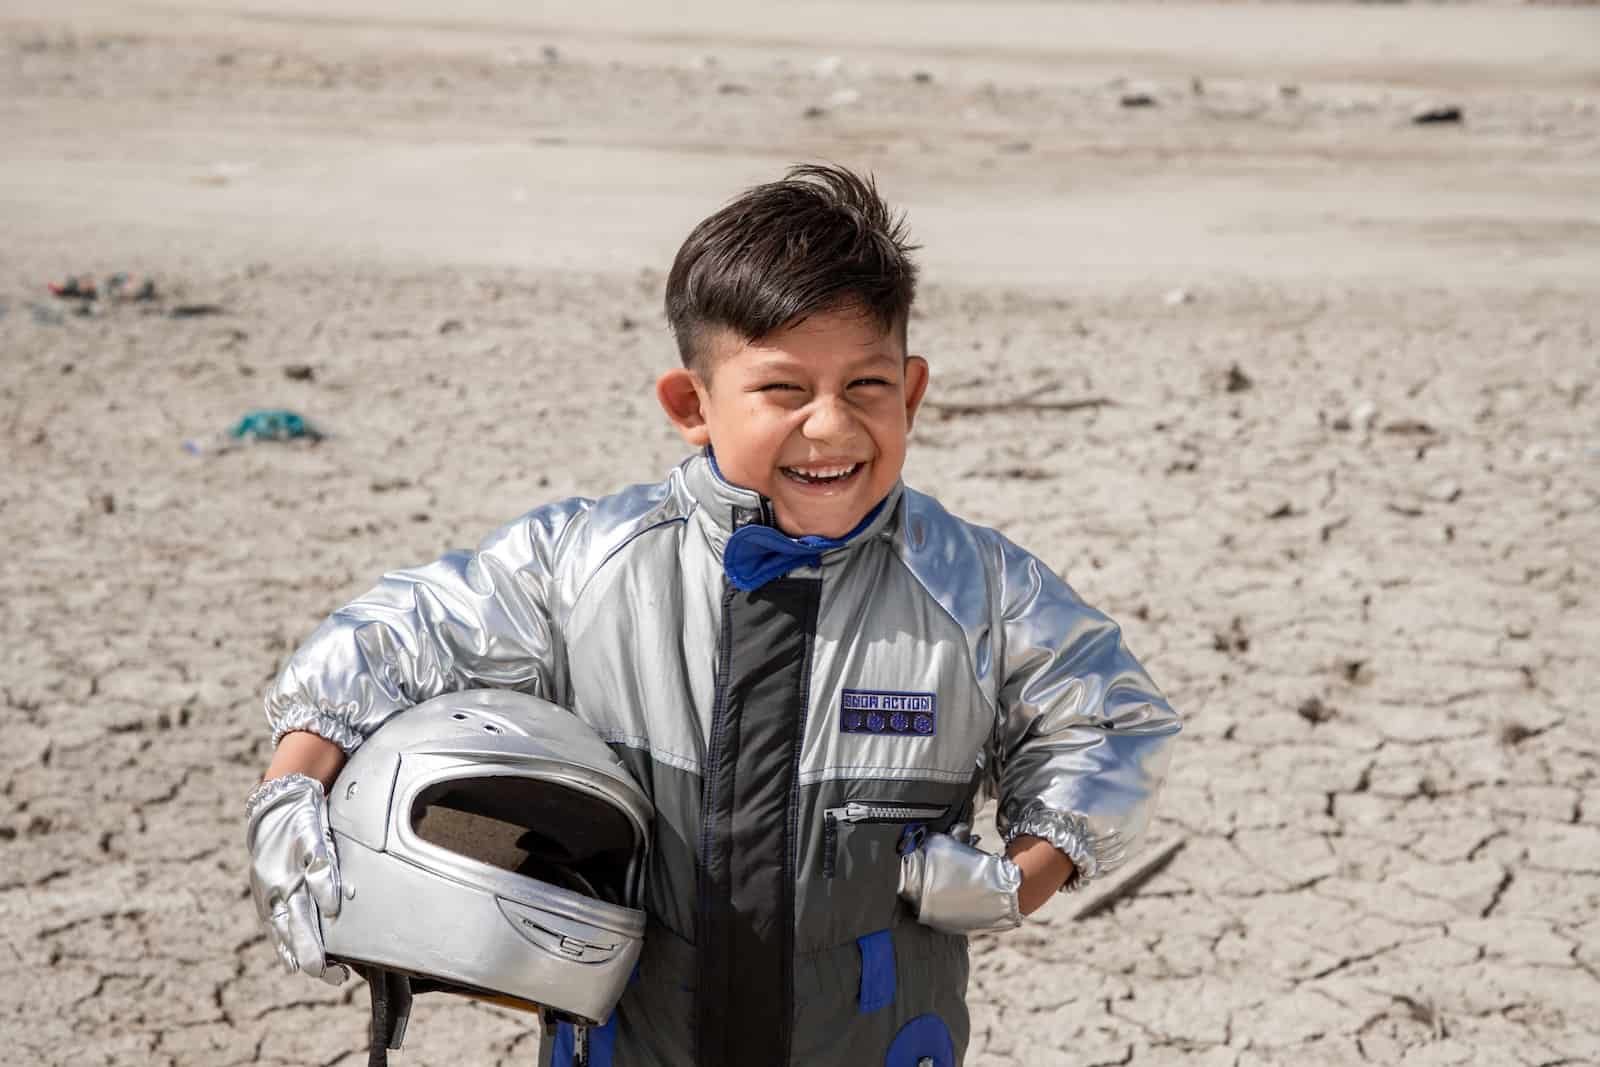 A boy wearing a silver suit and holding a silver helmet stands with one hand on his hip, smiling, in front of a dry, parched dirt background. 